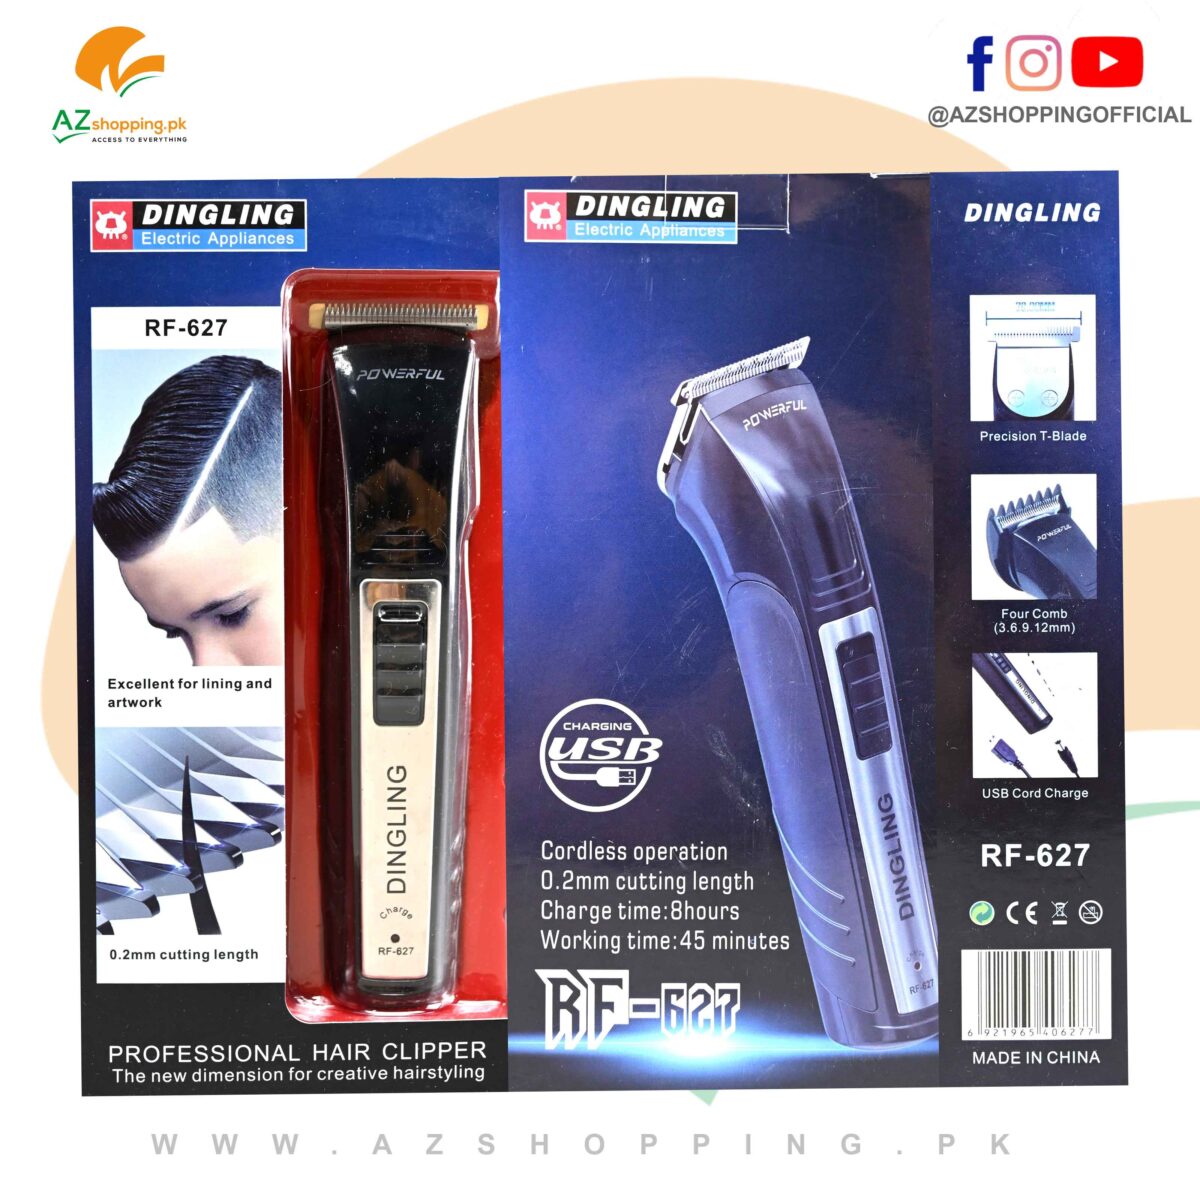 Dingling – Professional Electric Hair Clipper, Trimmer, Groomer & Shaver Machine with Precision T-Blade, 0.2mm Cutting Length – Model: RF-627